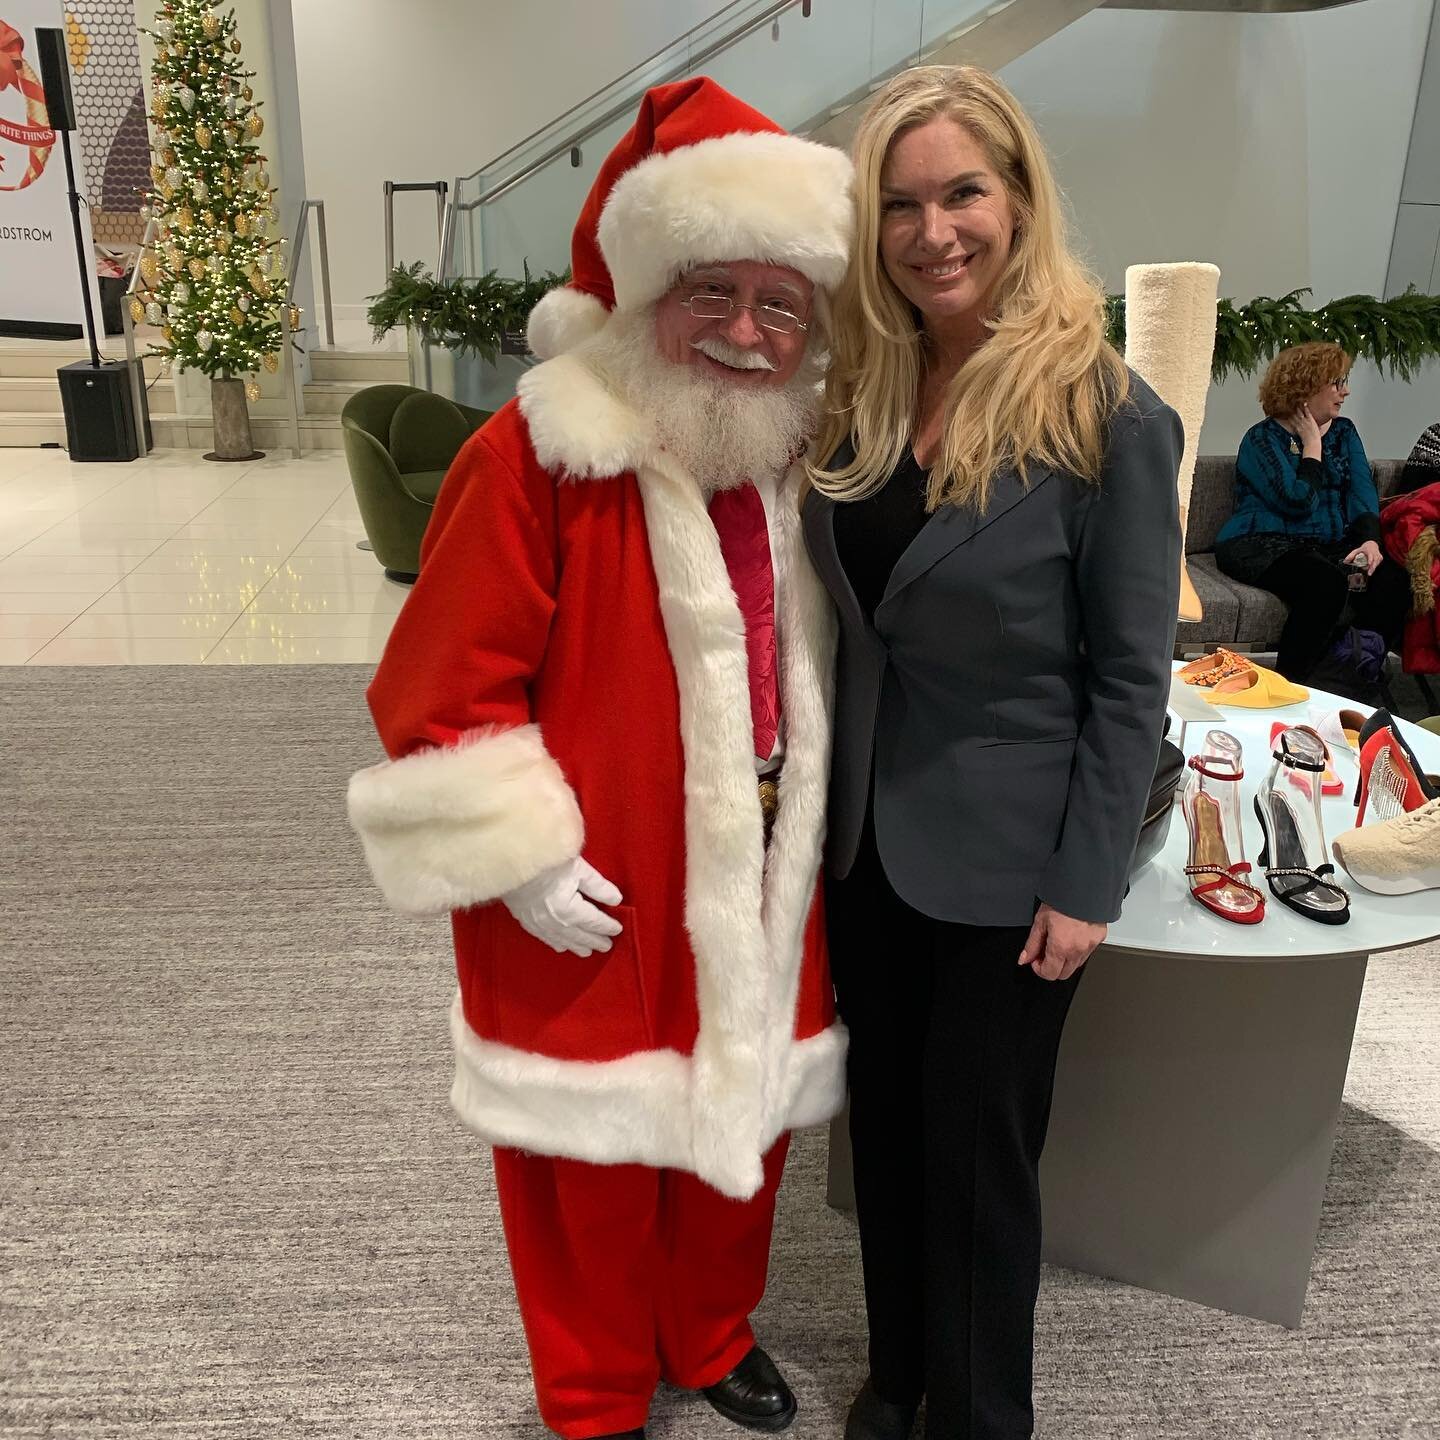 I found him! This was last year ( pre-pandemic) at the Oprah&rsquo;s Favorite Things event at @nordstrom NYC with @oprahmagazine 💜🎄

Live everyday like it is a lifetime 🙏 Be present, be grateful, be of service and find the 🥲 Joy

Let us meet each